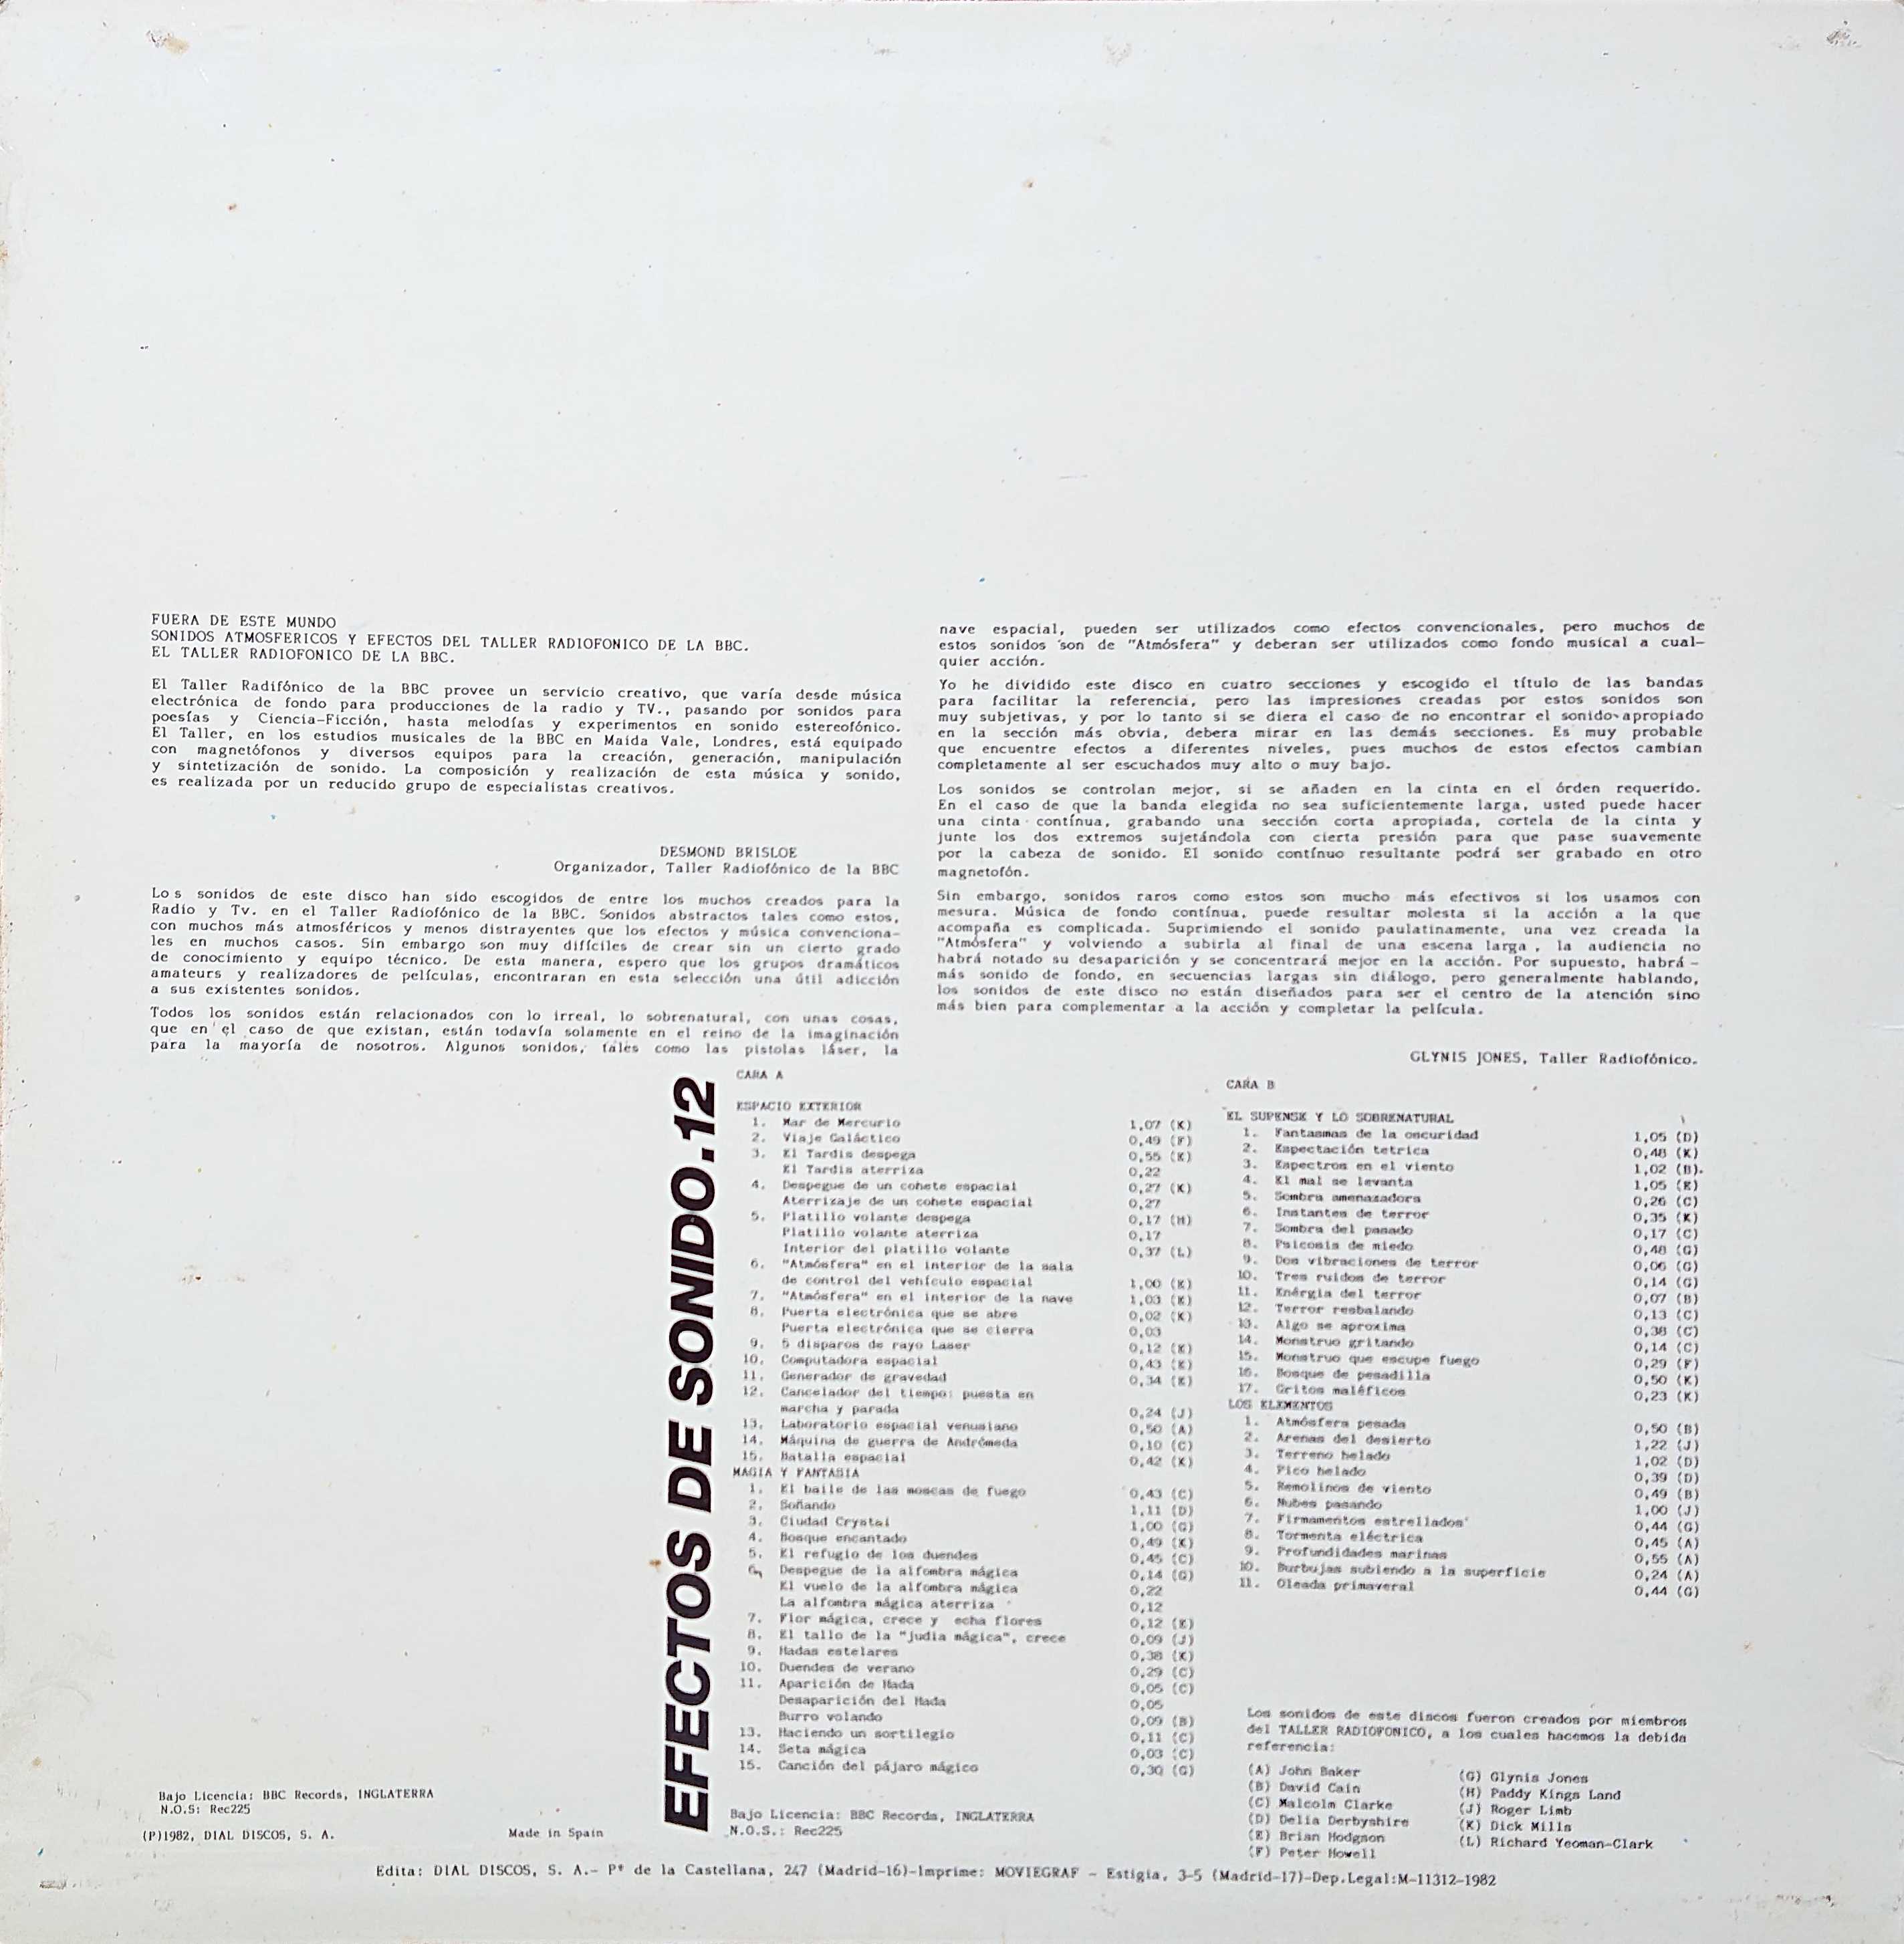 Picture of 51.0116 Efectos de sonido Vol 12 by artist Various / BBC Radiophonic Workshop from the BBC records and Tapes library